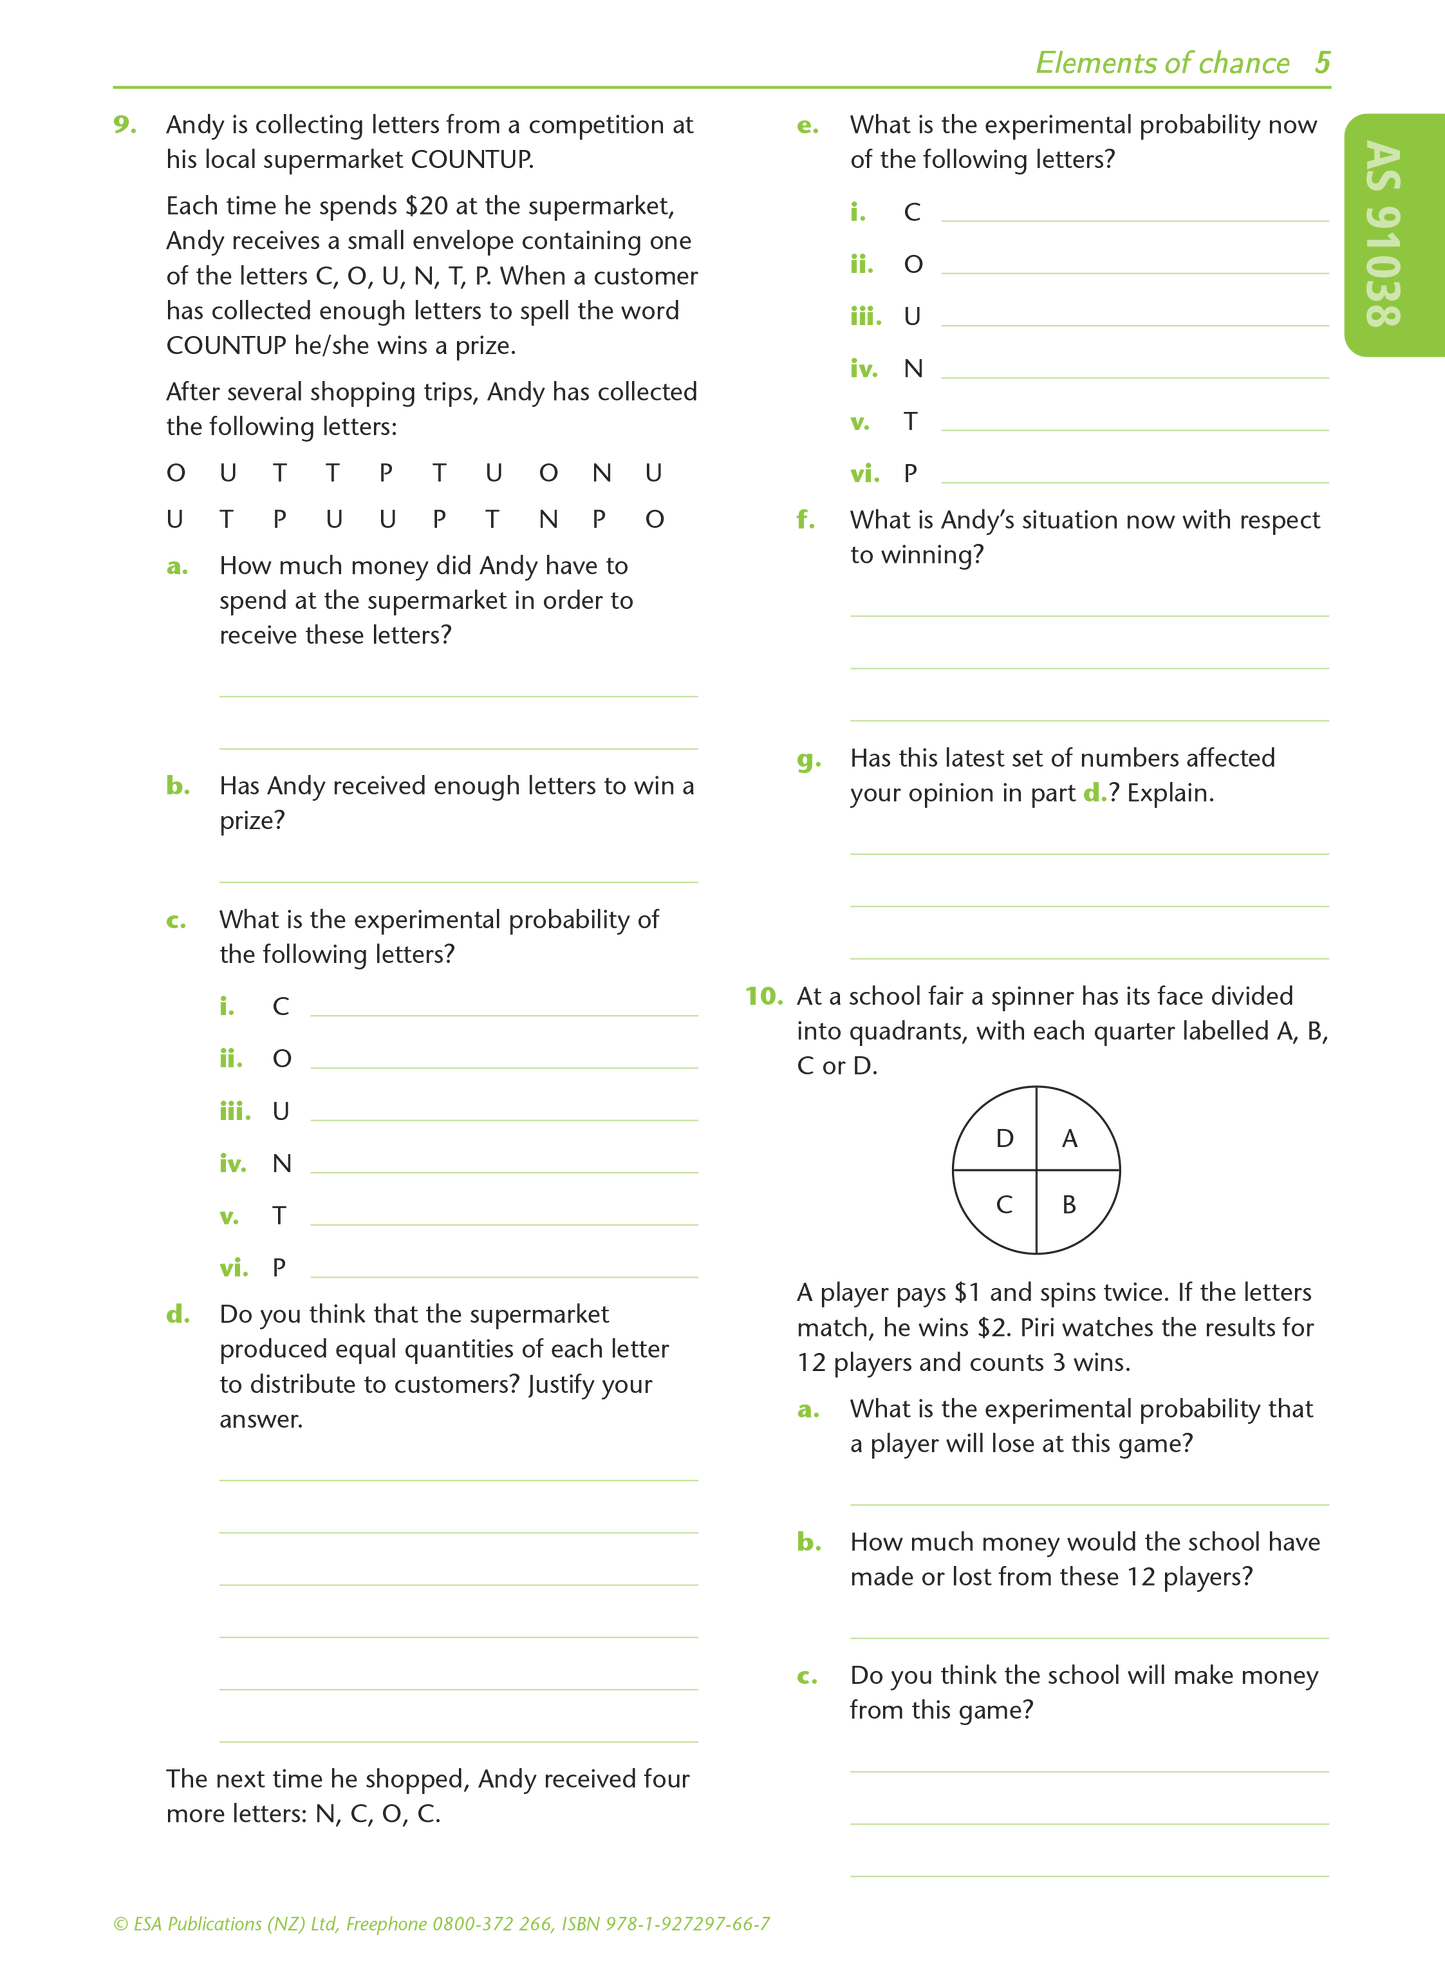 Level 1 Elements of Chance 1.13 Learning Workbook